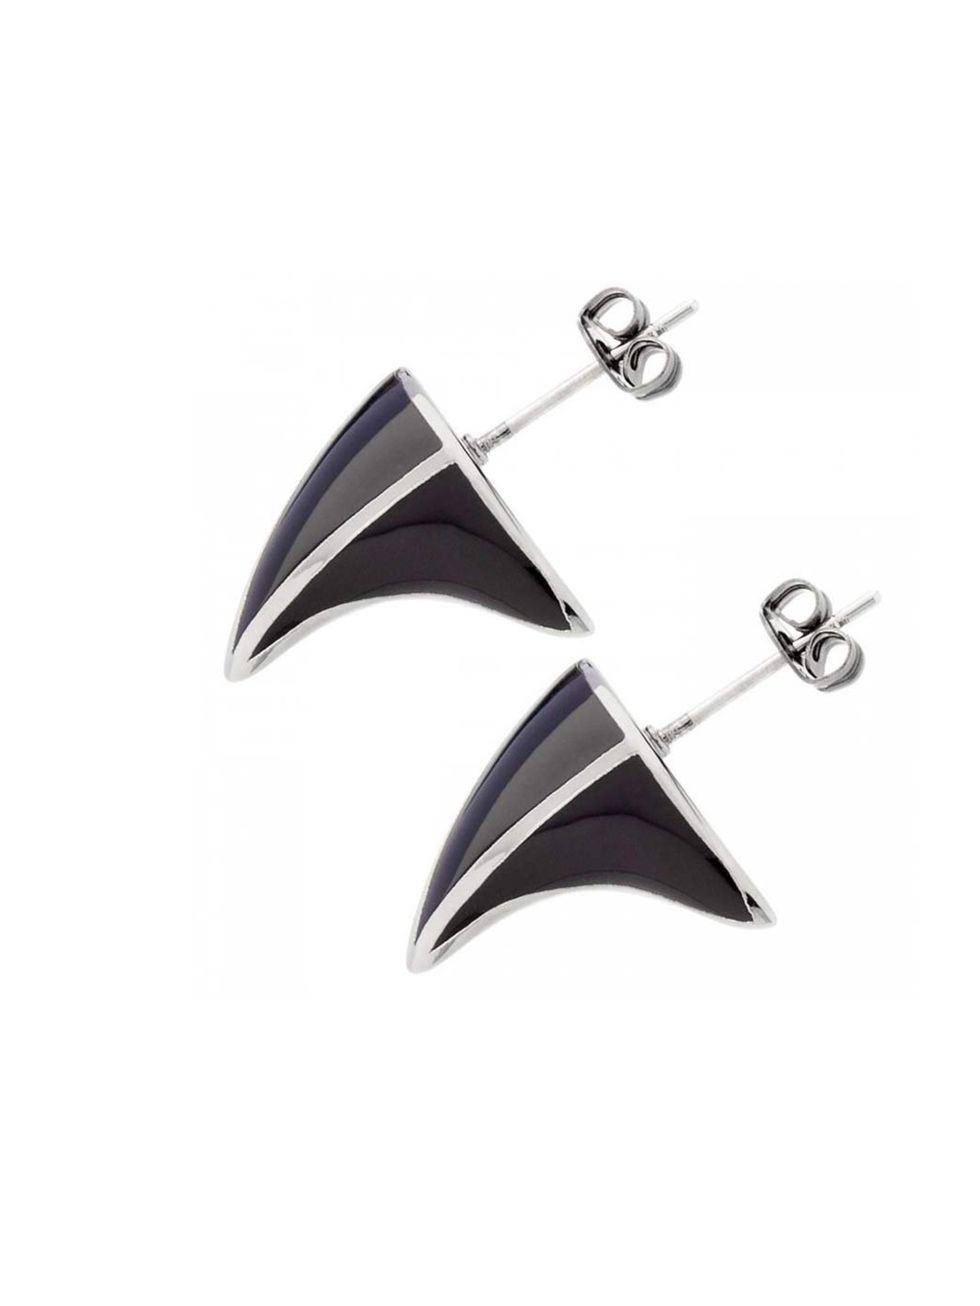 <p>DJ by Dominic Jones earrings, £50, at <a href="http://www.harveynichols.com/womens/categories-1/jewellery/earrings/s429592-large-white-gold-plated-thorn-earrings.html?colour=BLACK+AND+OTHER">Harvey Nichols</a></p>